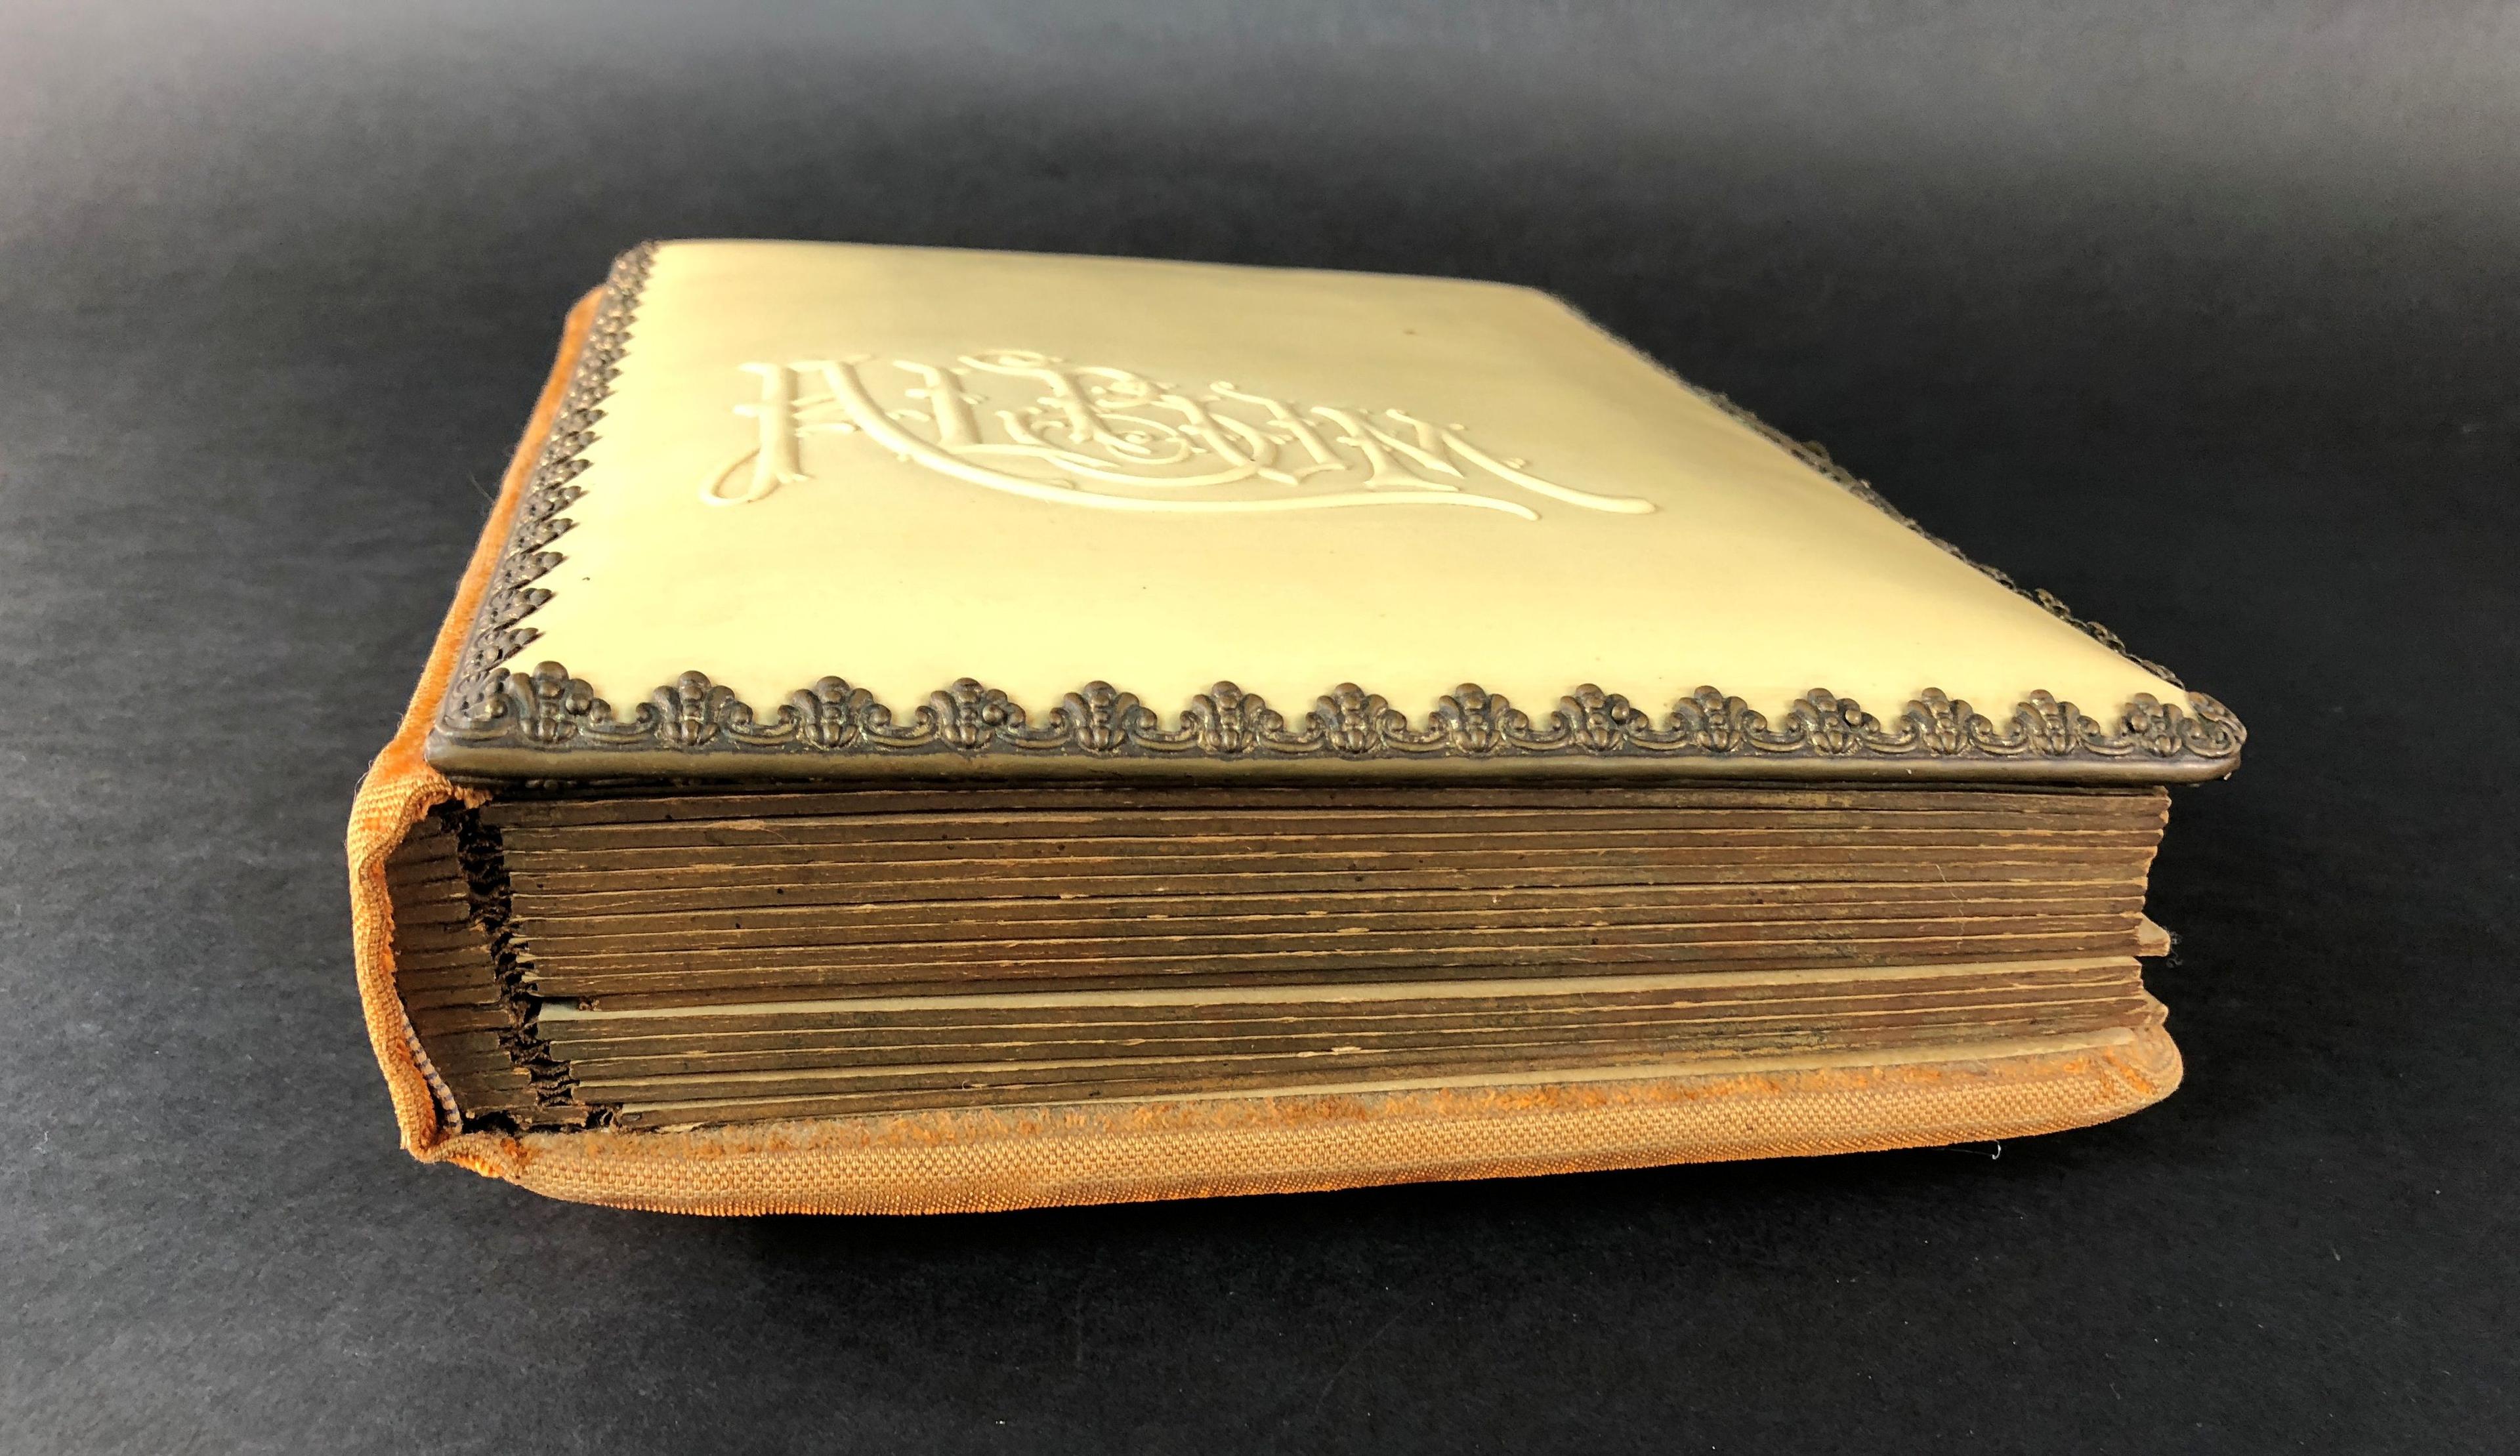 Antique Pyralin French Ivory Celluloid 1882 Photo Album and Cased German Manicure Set